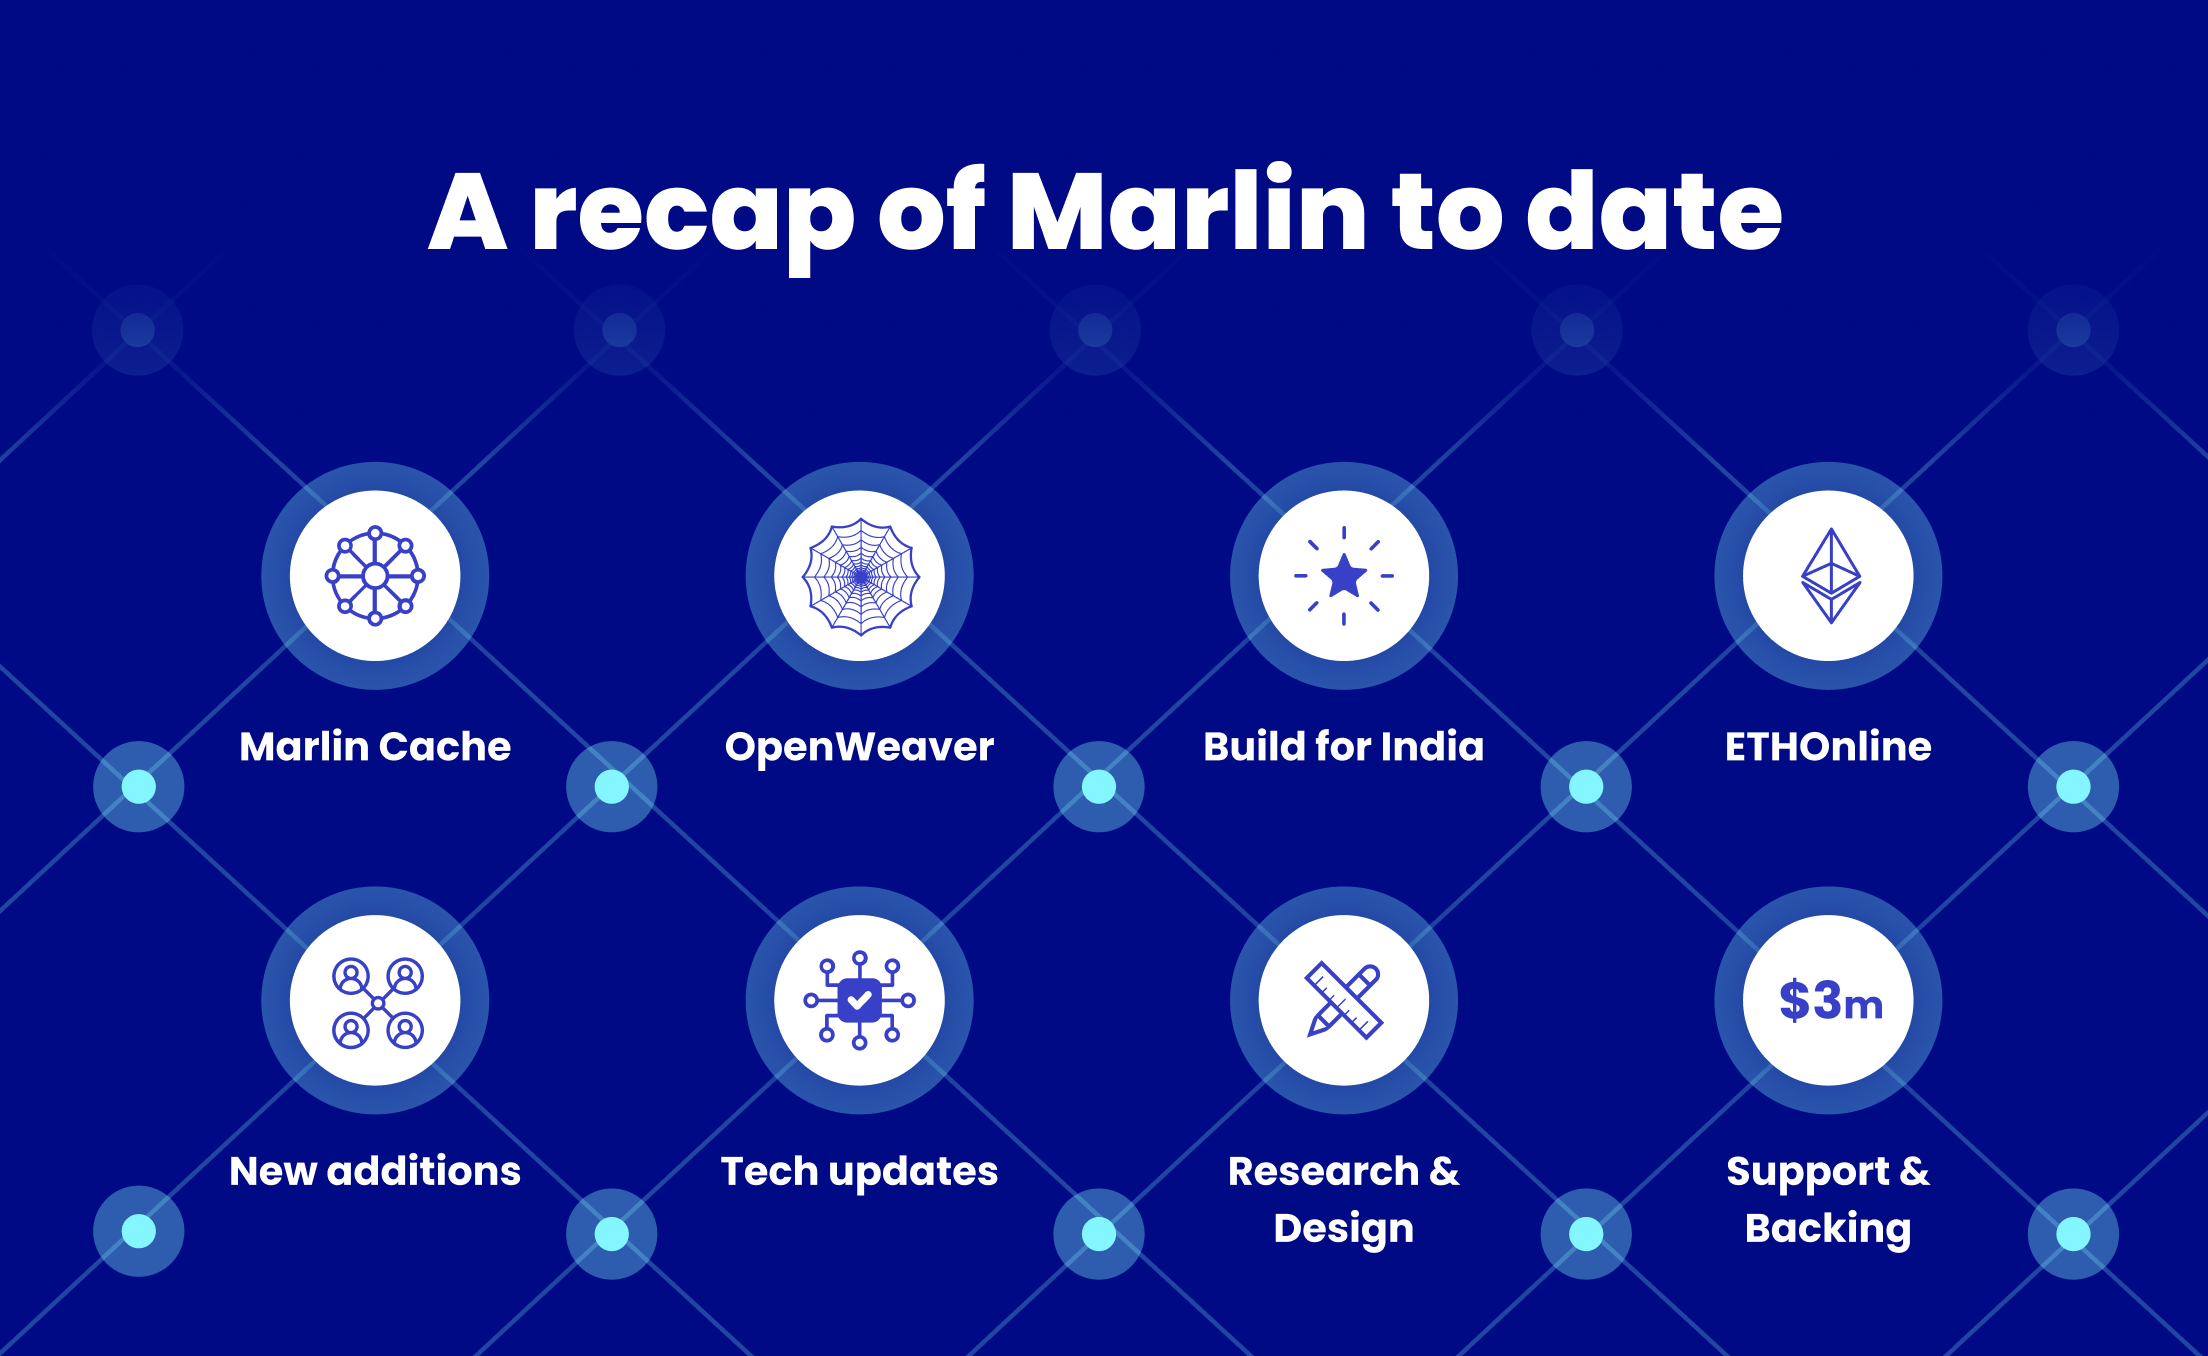 A recap of Marlin to date